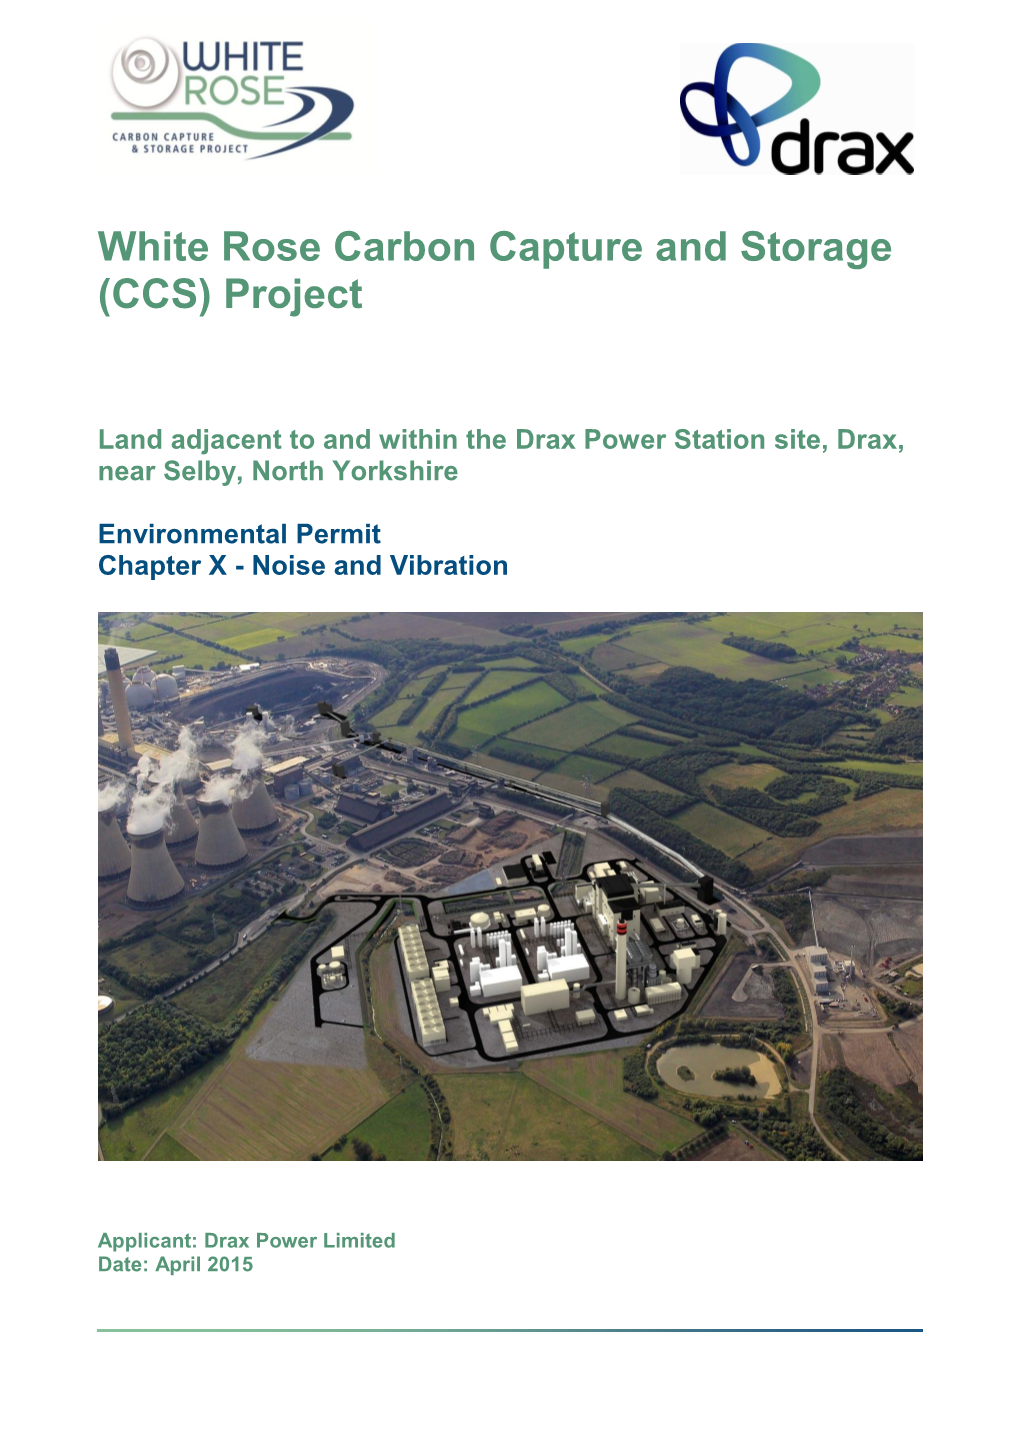 White Rose Carbon Capture and Storage (CCS) Project